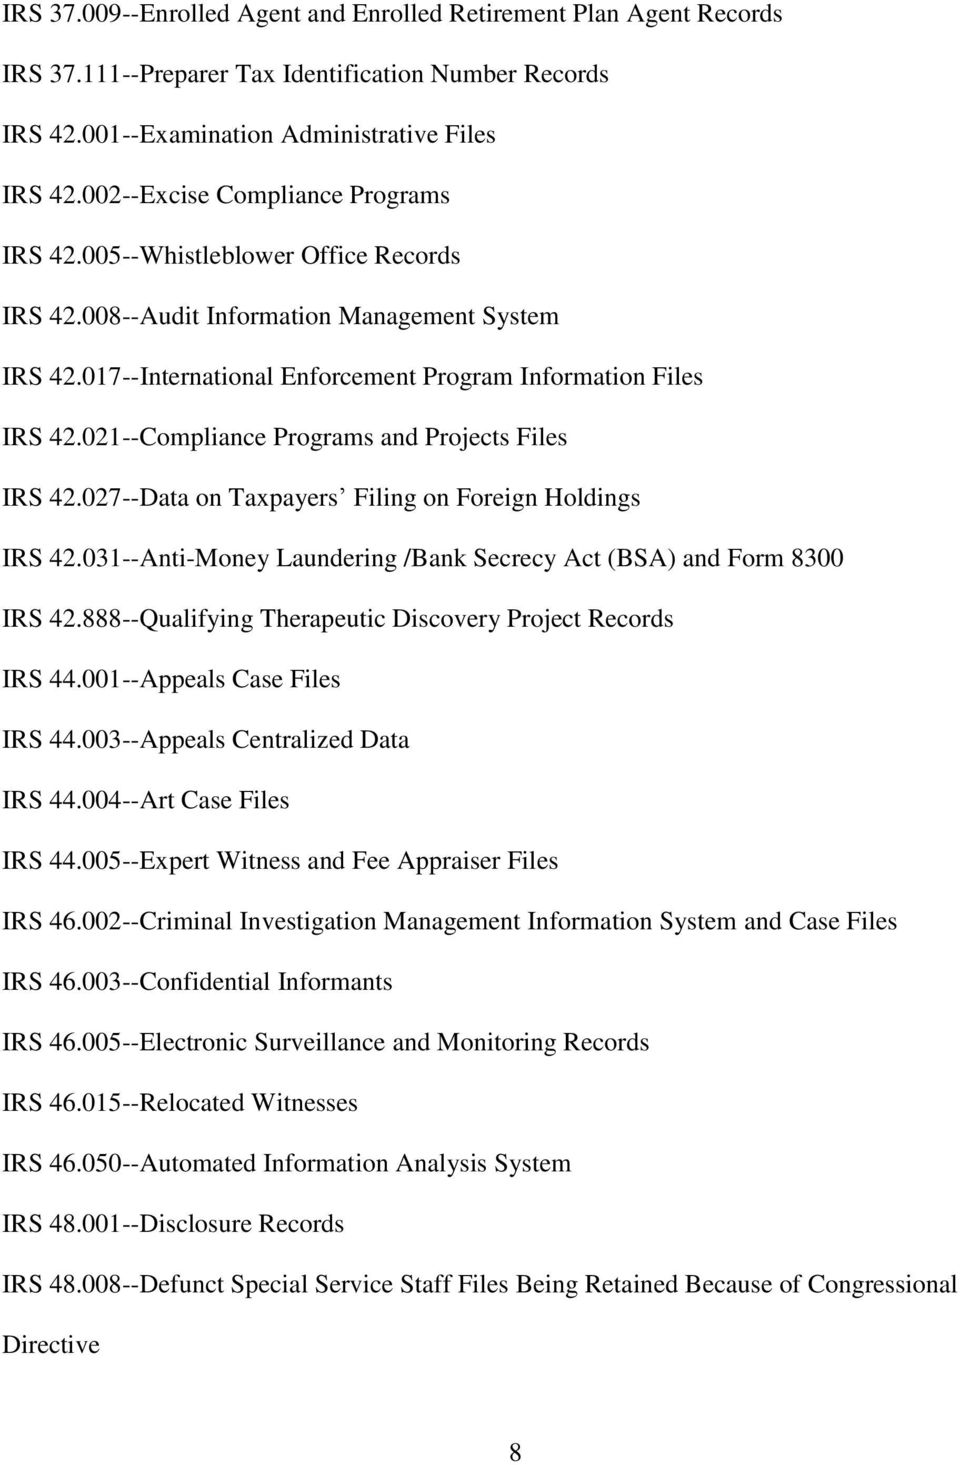 021--Compliance Programs and Projects Files IRS 42.027--Data on Taxpayers Filing on Foreign Holdings IRS 42.031--Anti-Money Laundering /Bank Secrecy Act (BSA) and Form 8300 IRS 42.